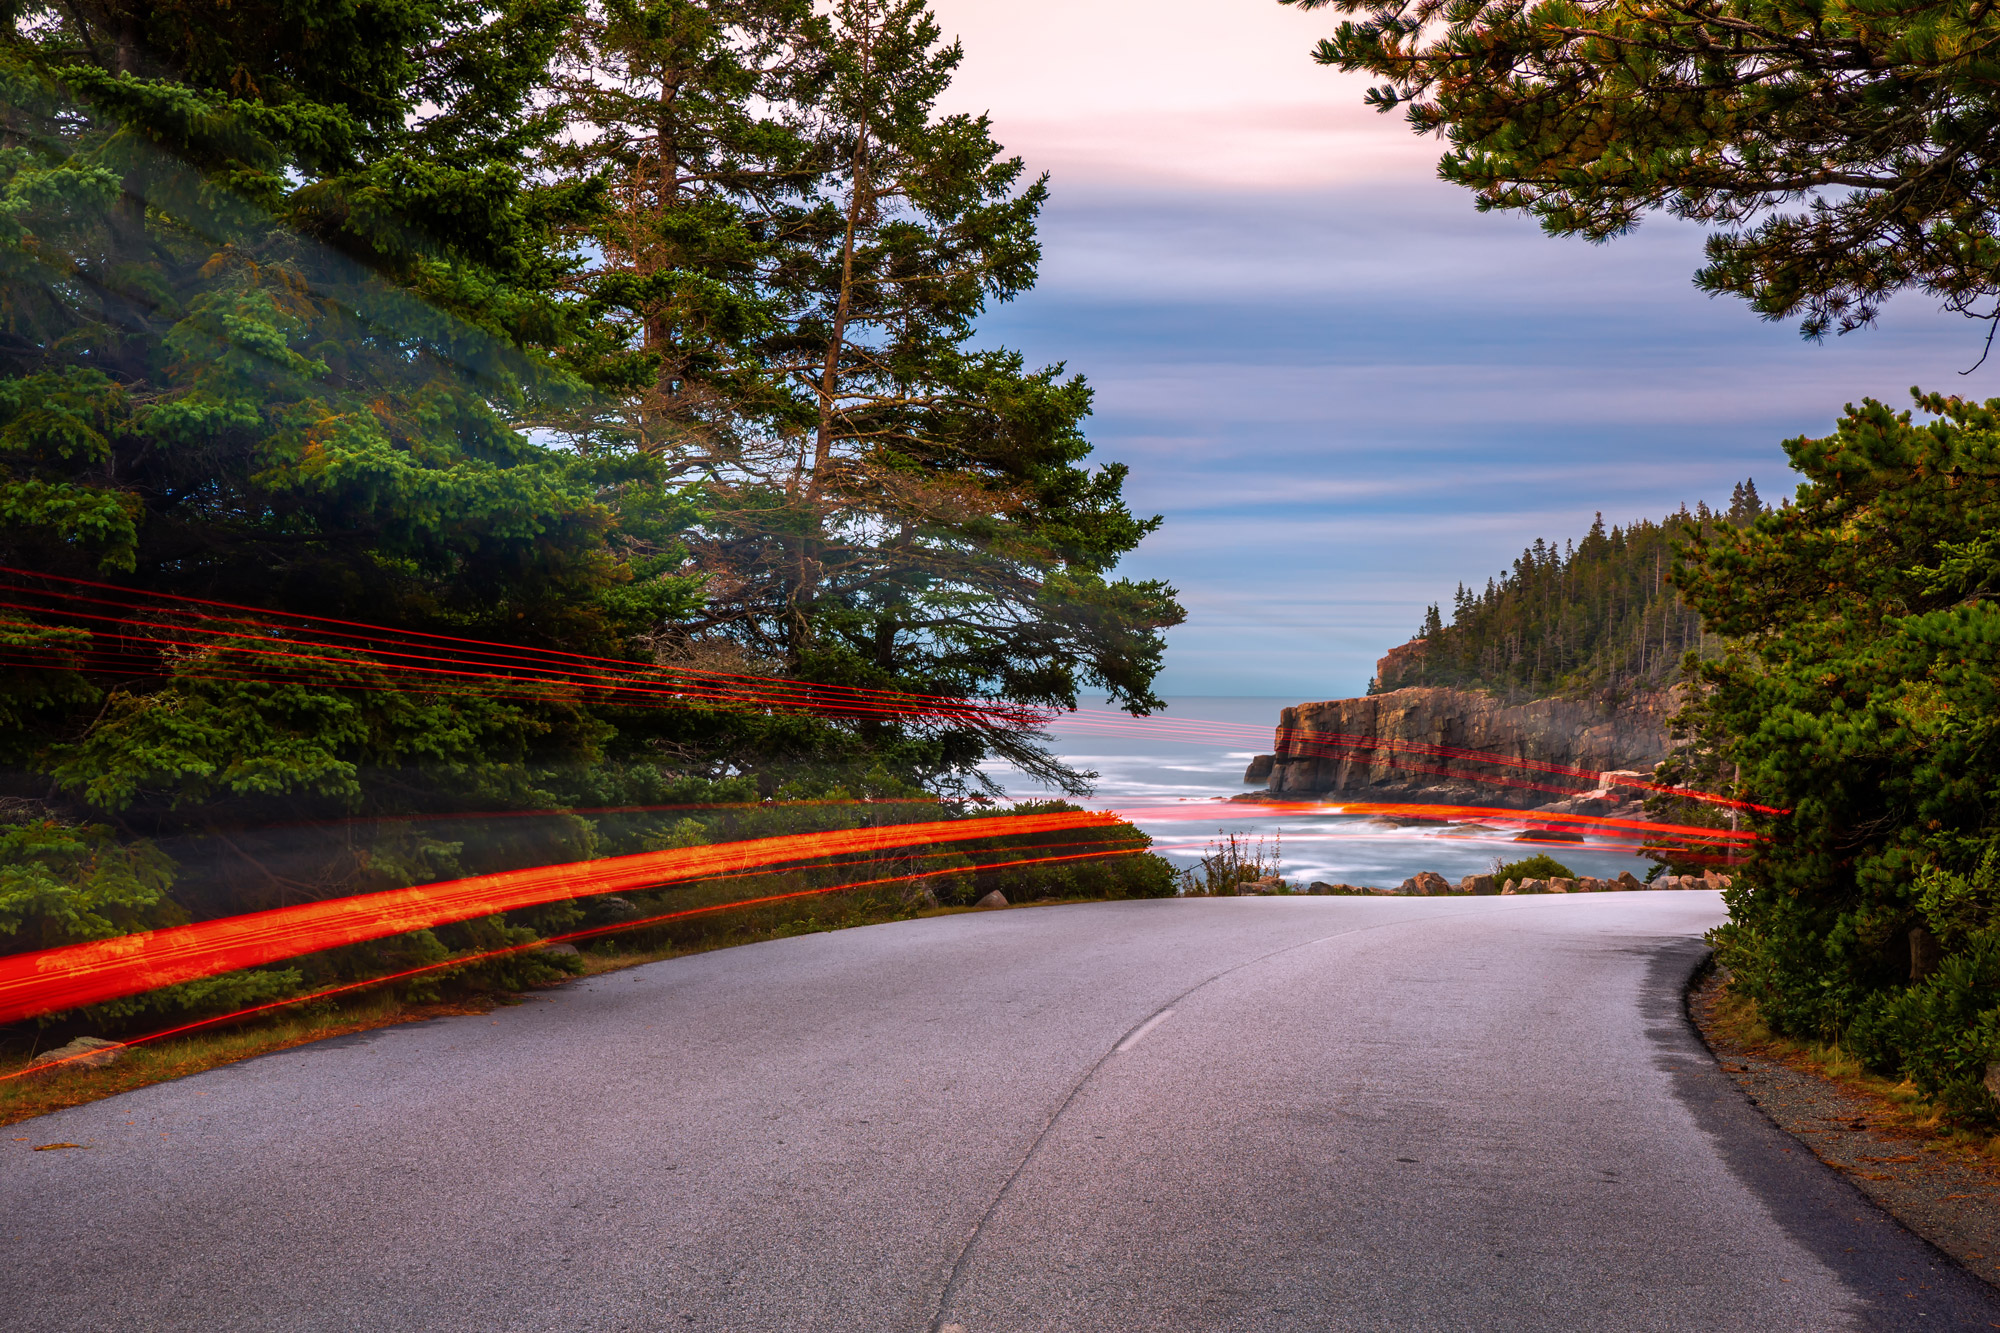 Long exposure of headlights on Park Loop Road in Acadia National Park, One of the best scenic drives in the US